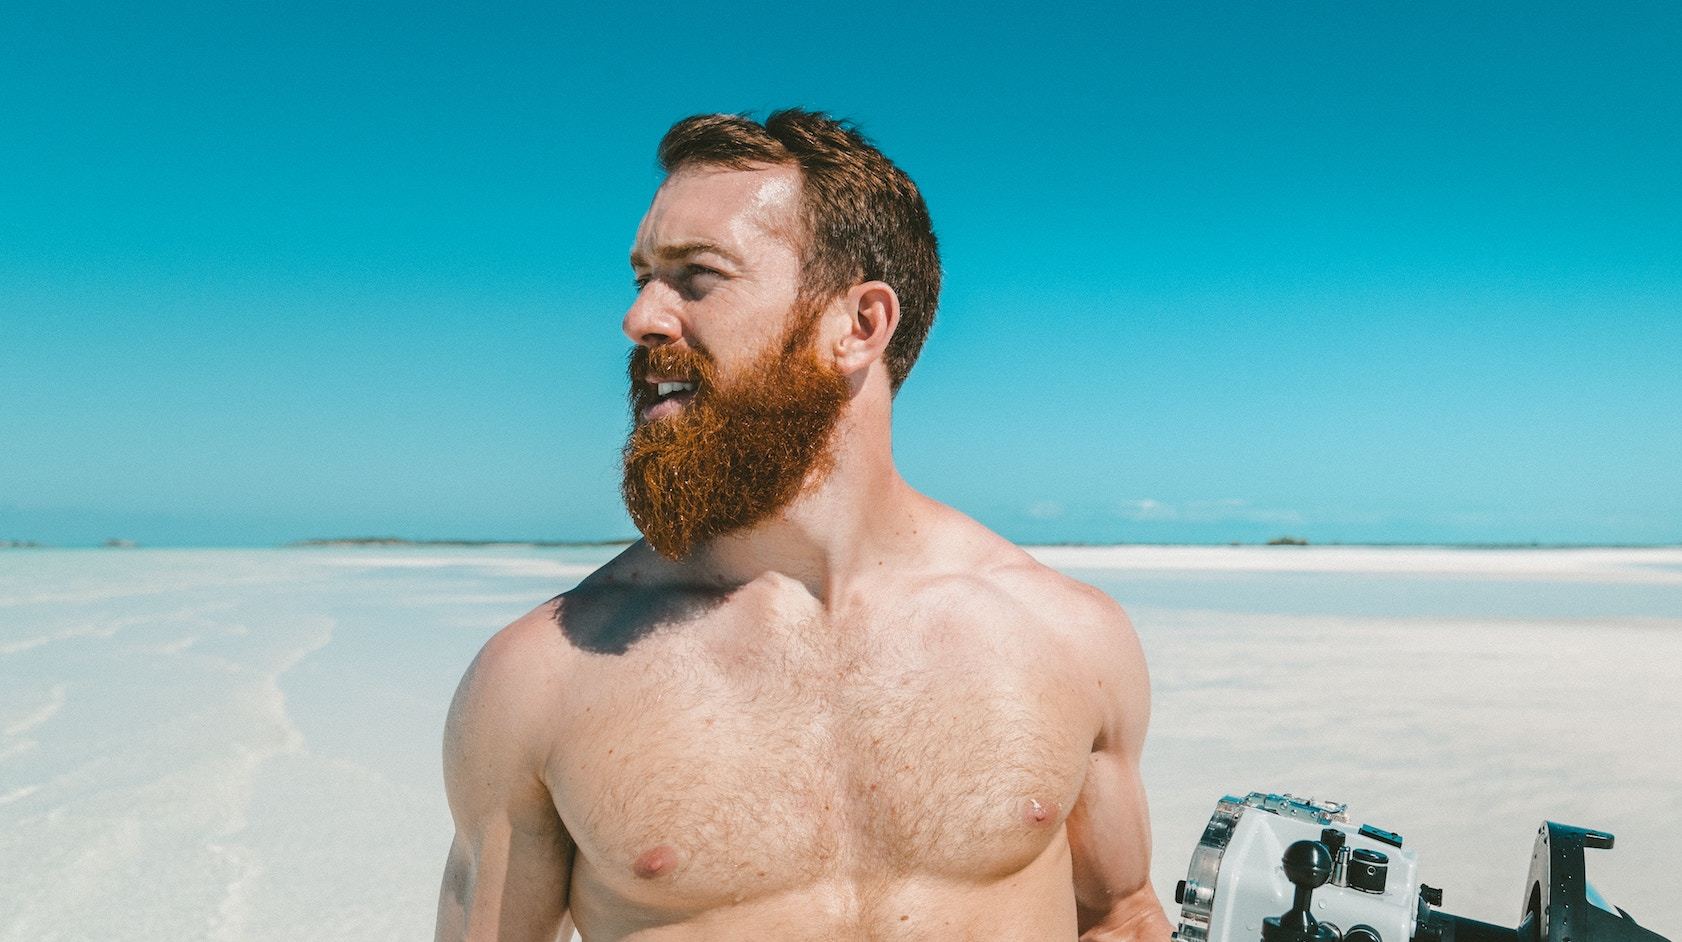 Manscaping: Beginners Guide to Body Grooming / Advice & Knowledge